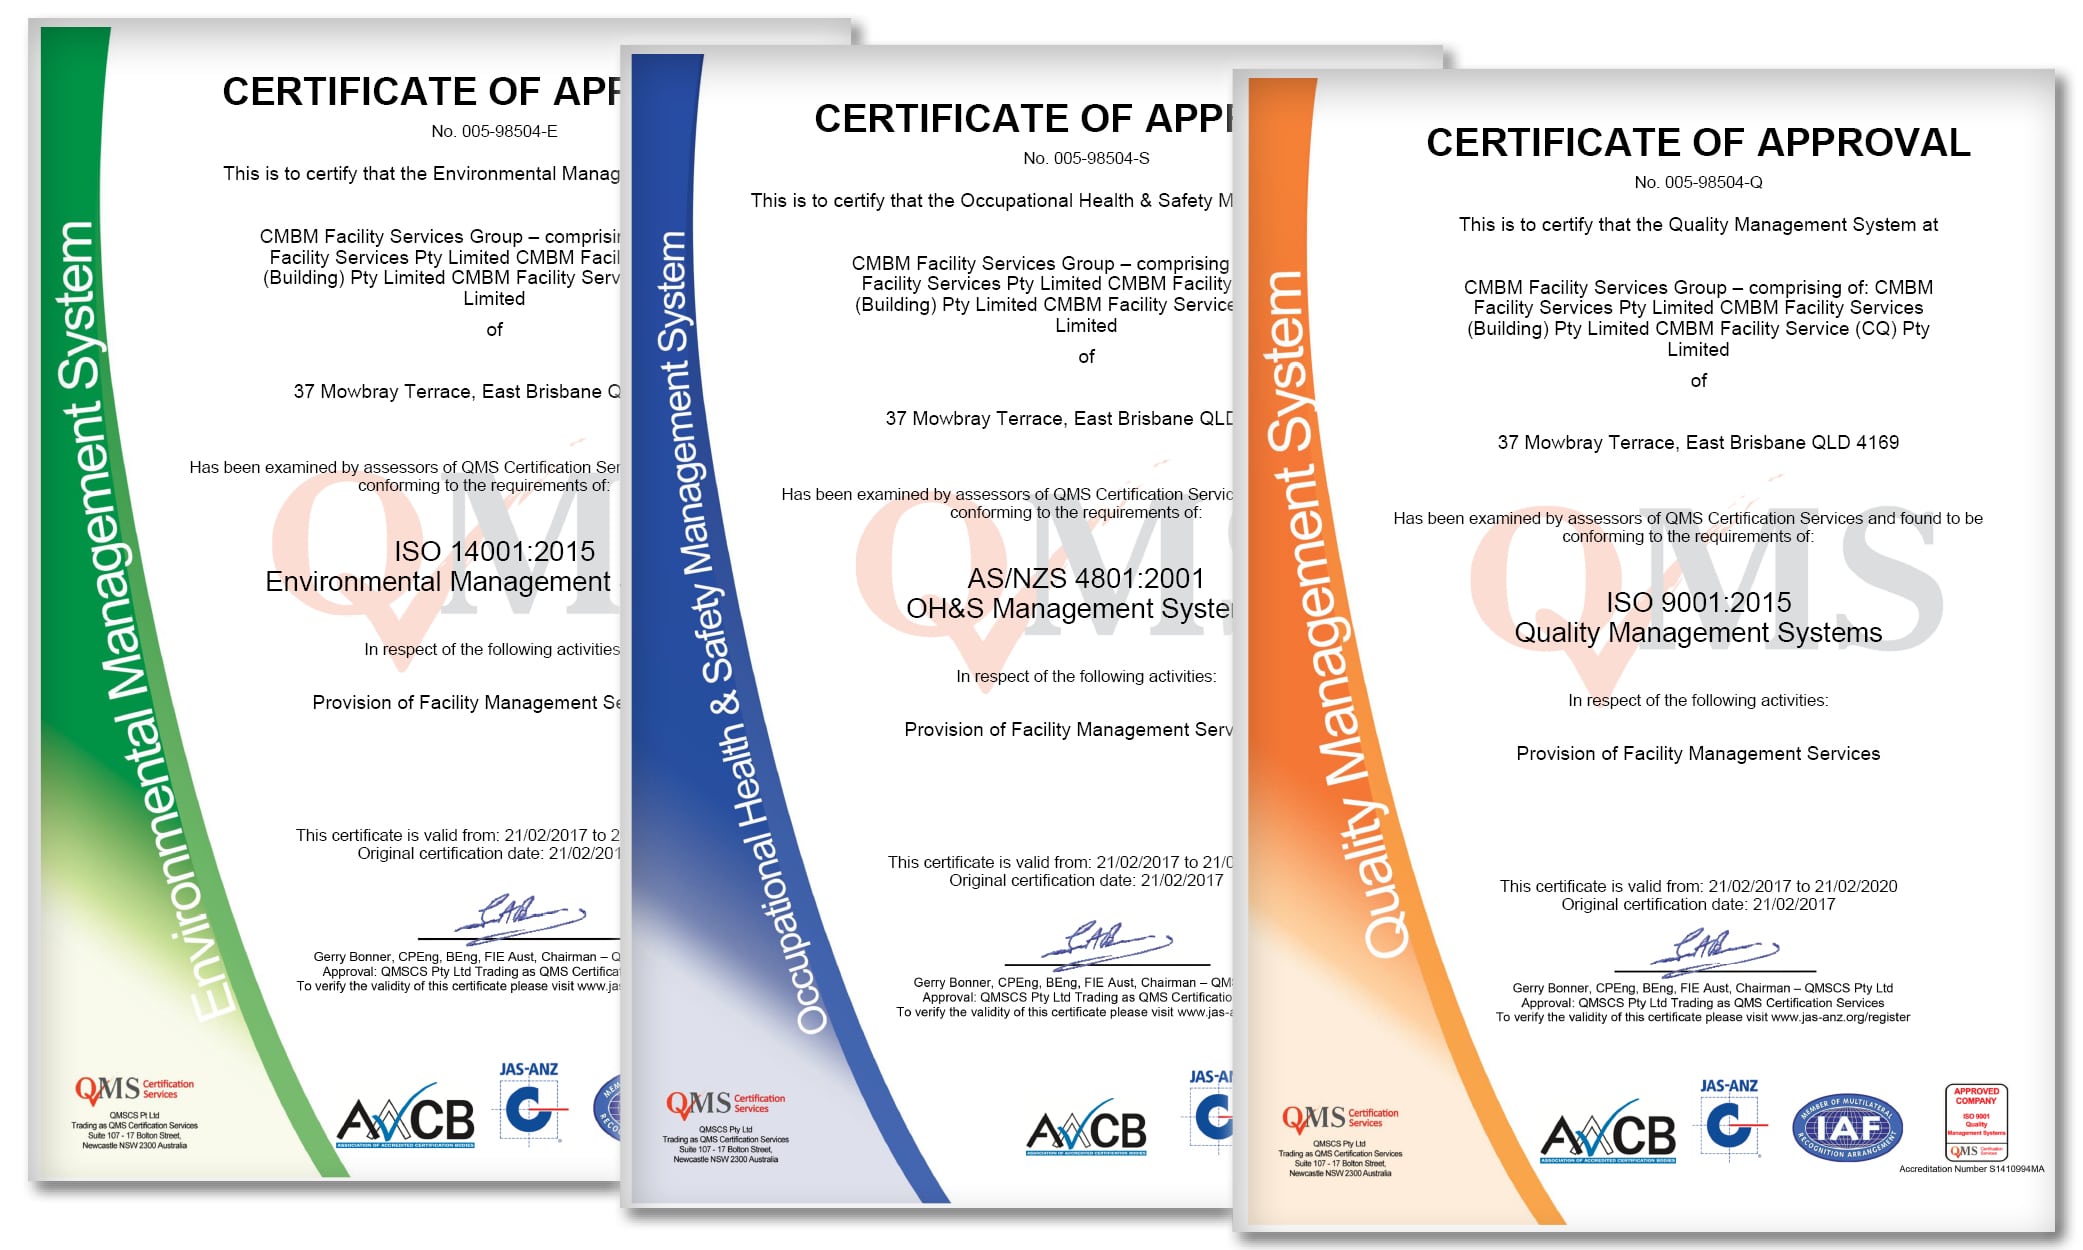 CMBM achieve the highest level of Safety, Quality and Environmental Certification from ISO